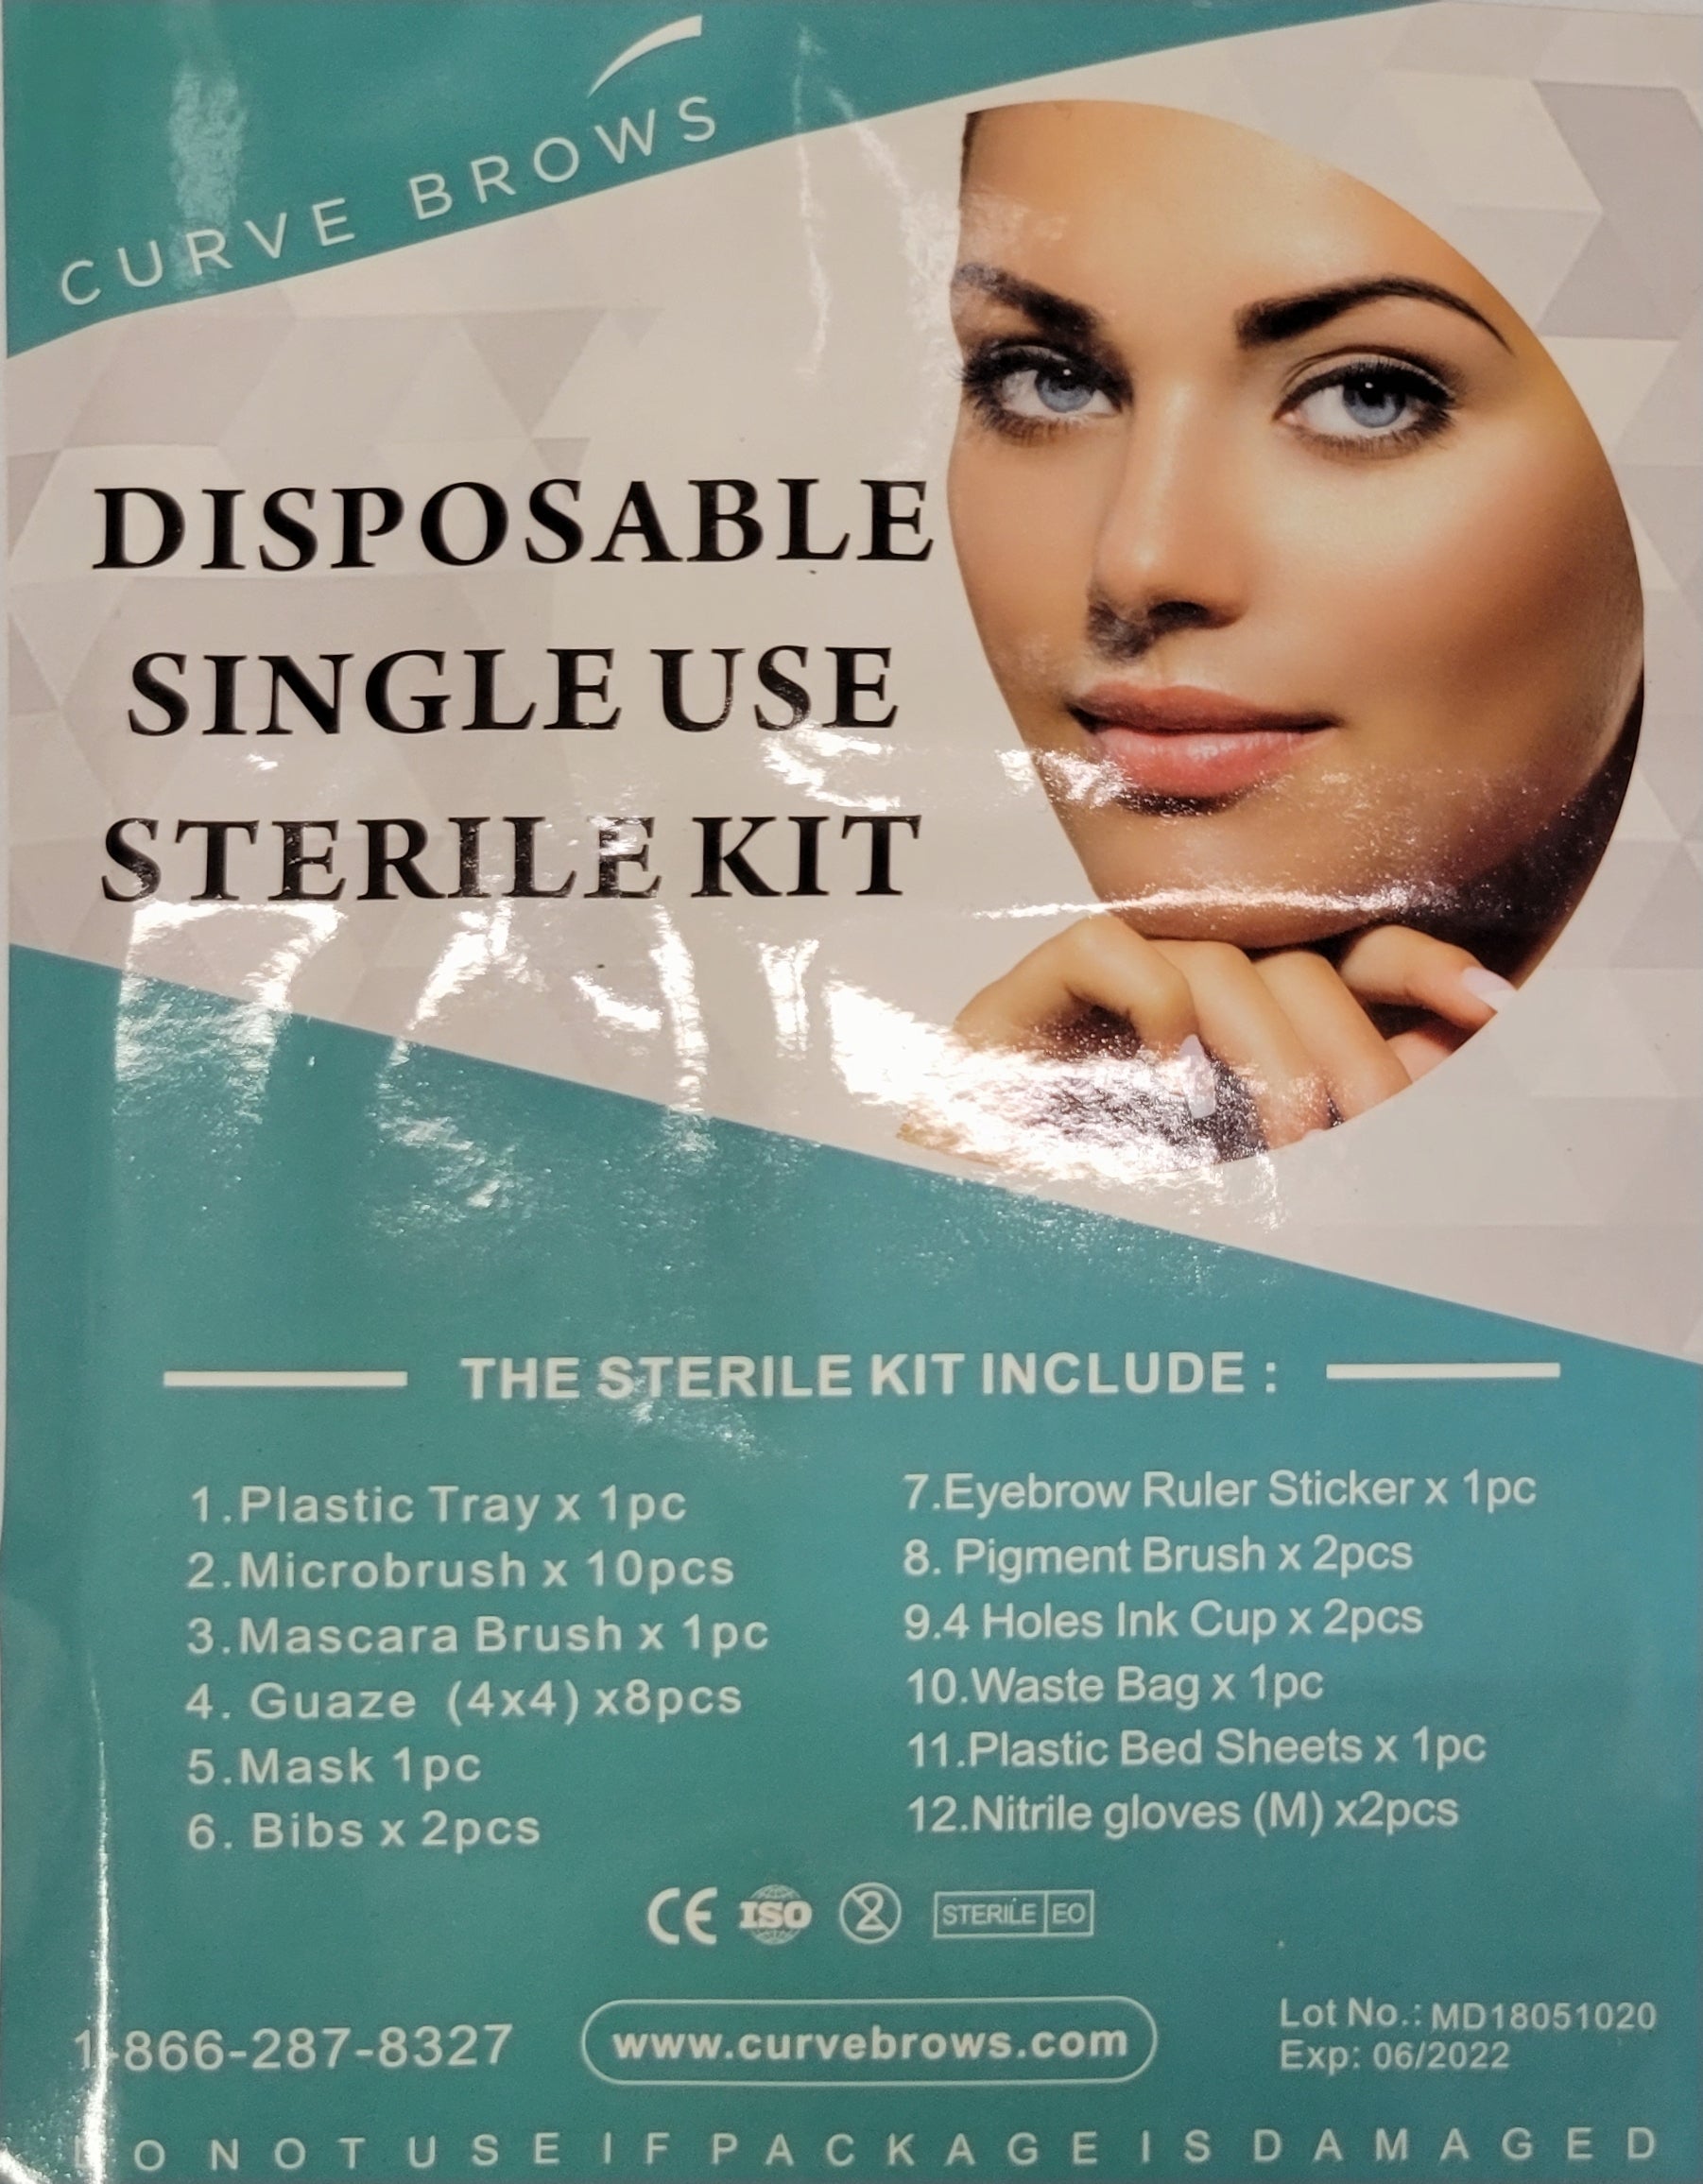 Curve Brows Disposable Single Use Sterile Kit - Creata Beauty - Professional Beauty Products